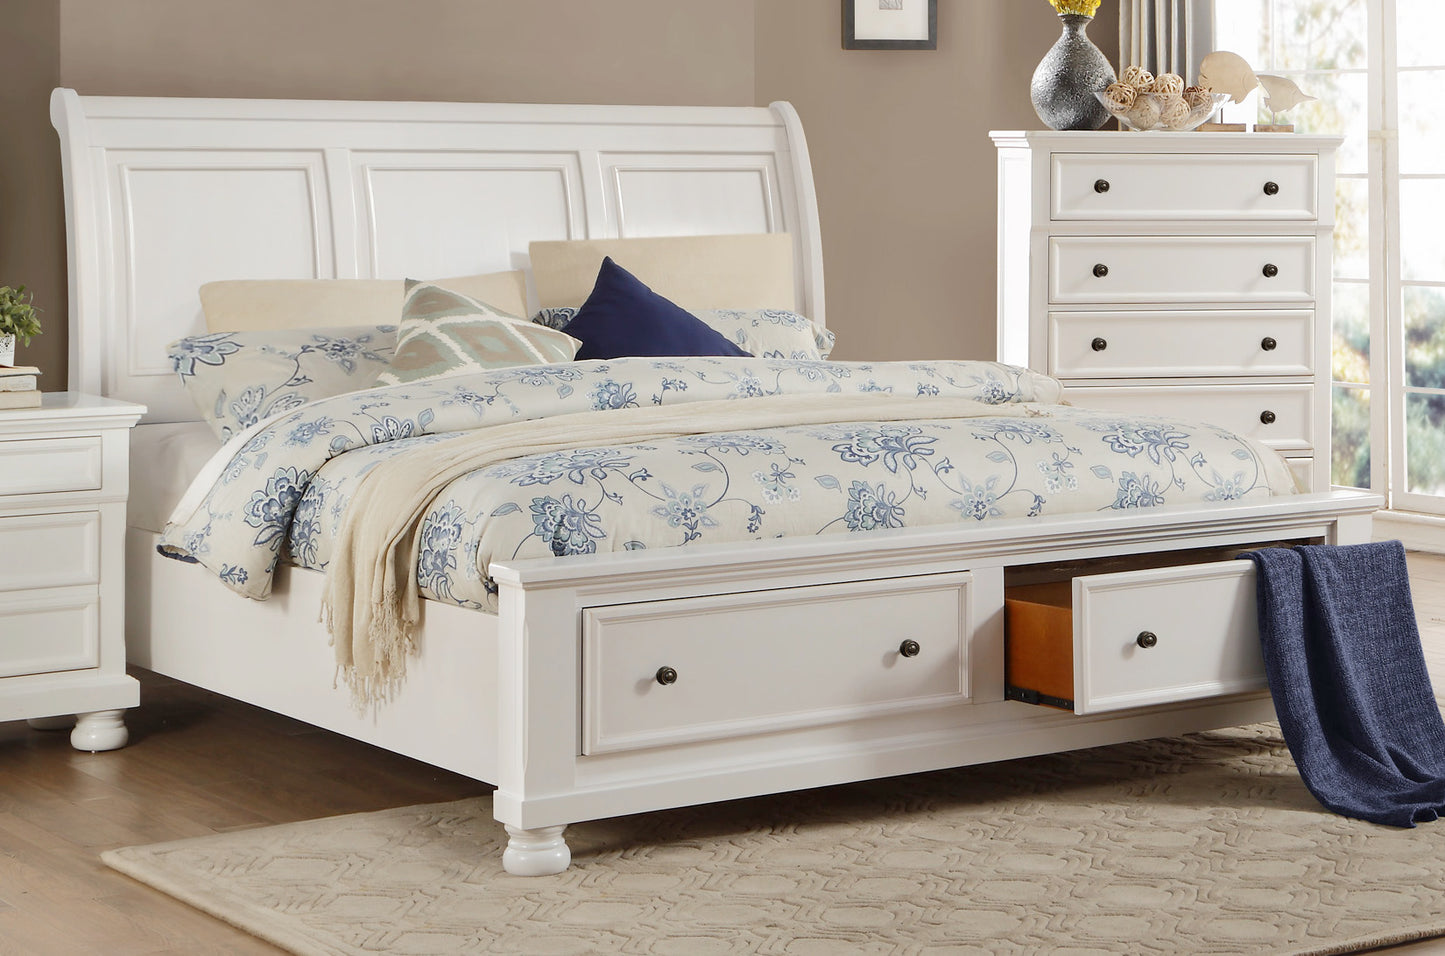 Lexington Cottage Queen Sleigh Platform Bed with Footboard Storage in White